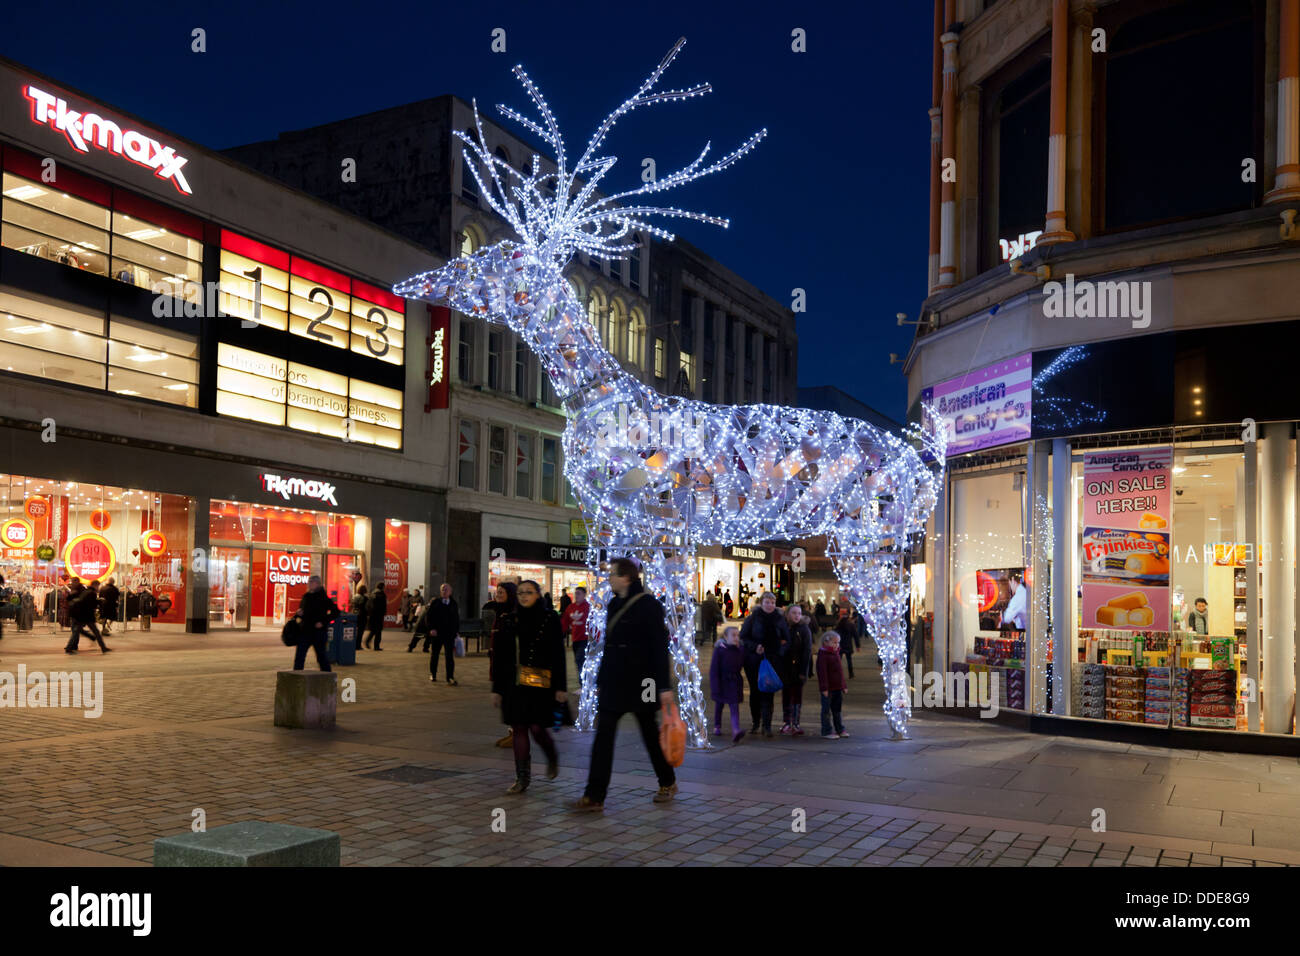 Illuminated Reindeer, part of the Christmas decorations in Argyle Street, Glasgow, Scotland, with passers by and shoppers. Stock Photo